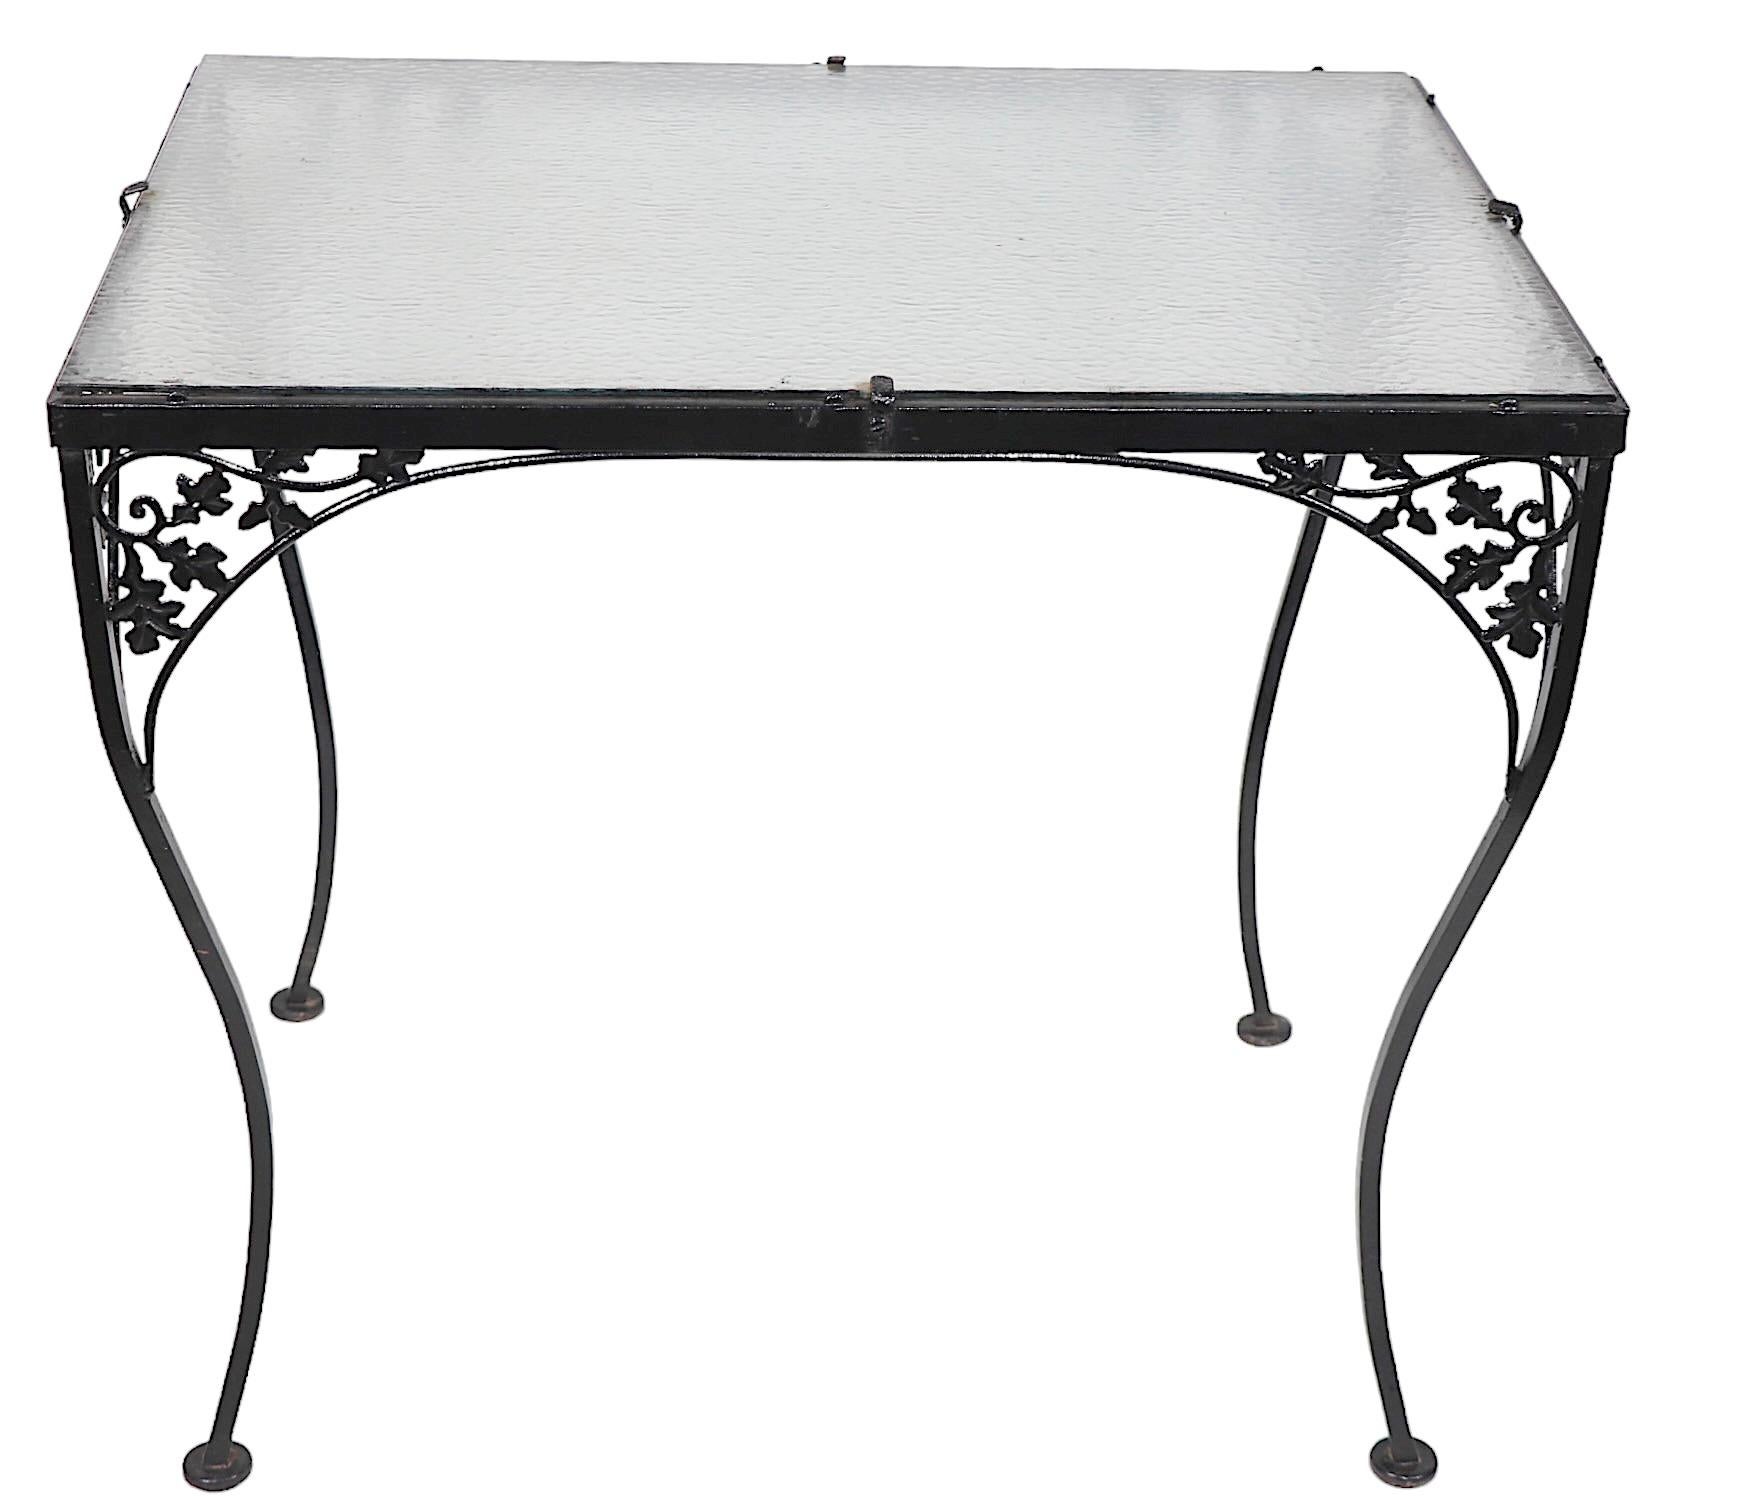 Ornate Wrought Iron and Glass Garden Patio Poolside Dining Table att. to Woodard For Sale 9